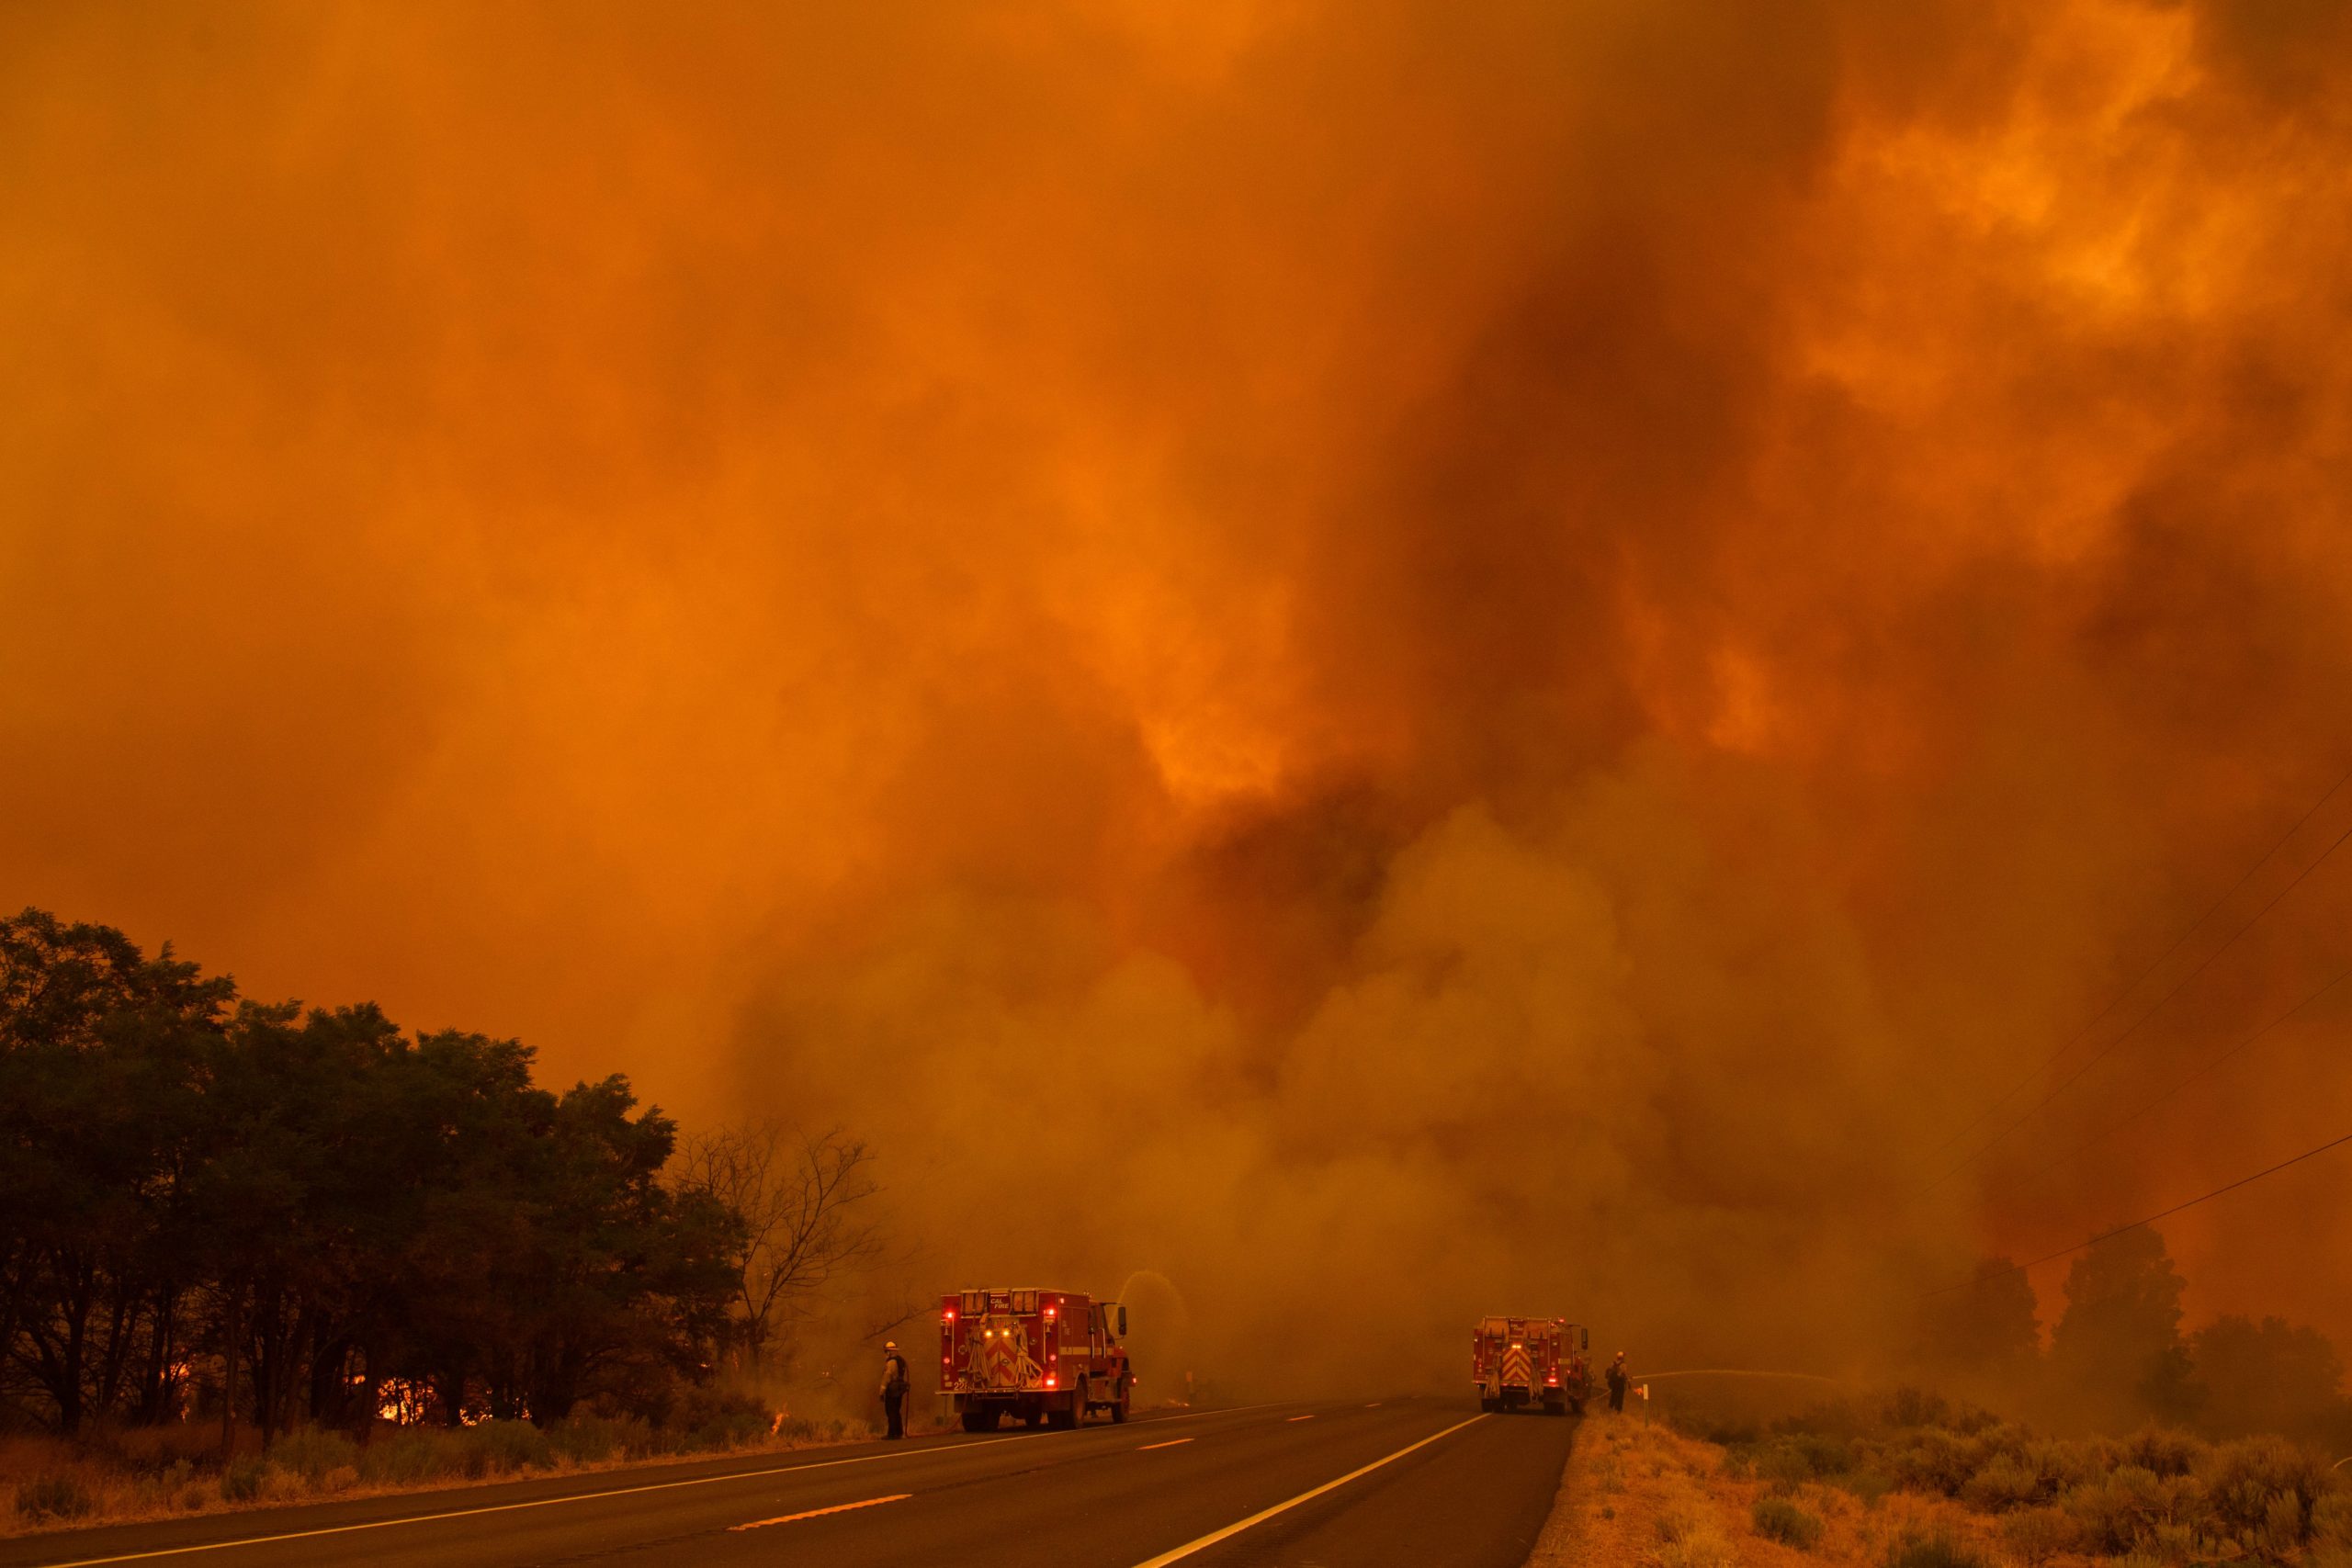 Flames and smoke plume into the air as firefighters try to contain the fire from spotting across Highway 395 during the Dixie Fire on August 17, 2021 near Milford, California. (Photo by PATRICK T. FALLON/AFP via Getty Images)